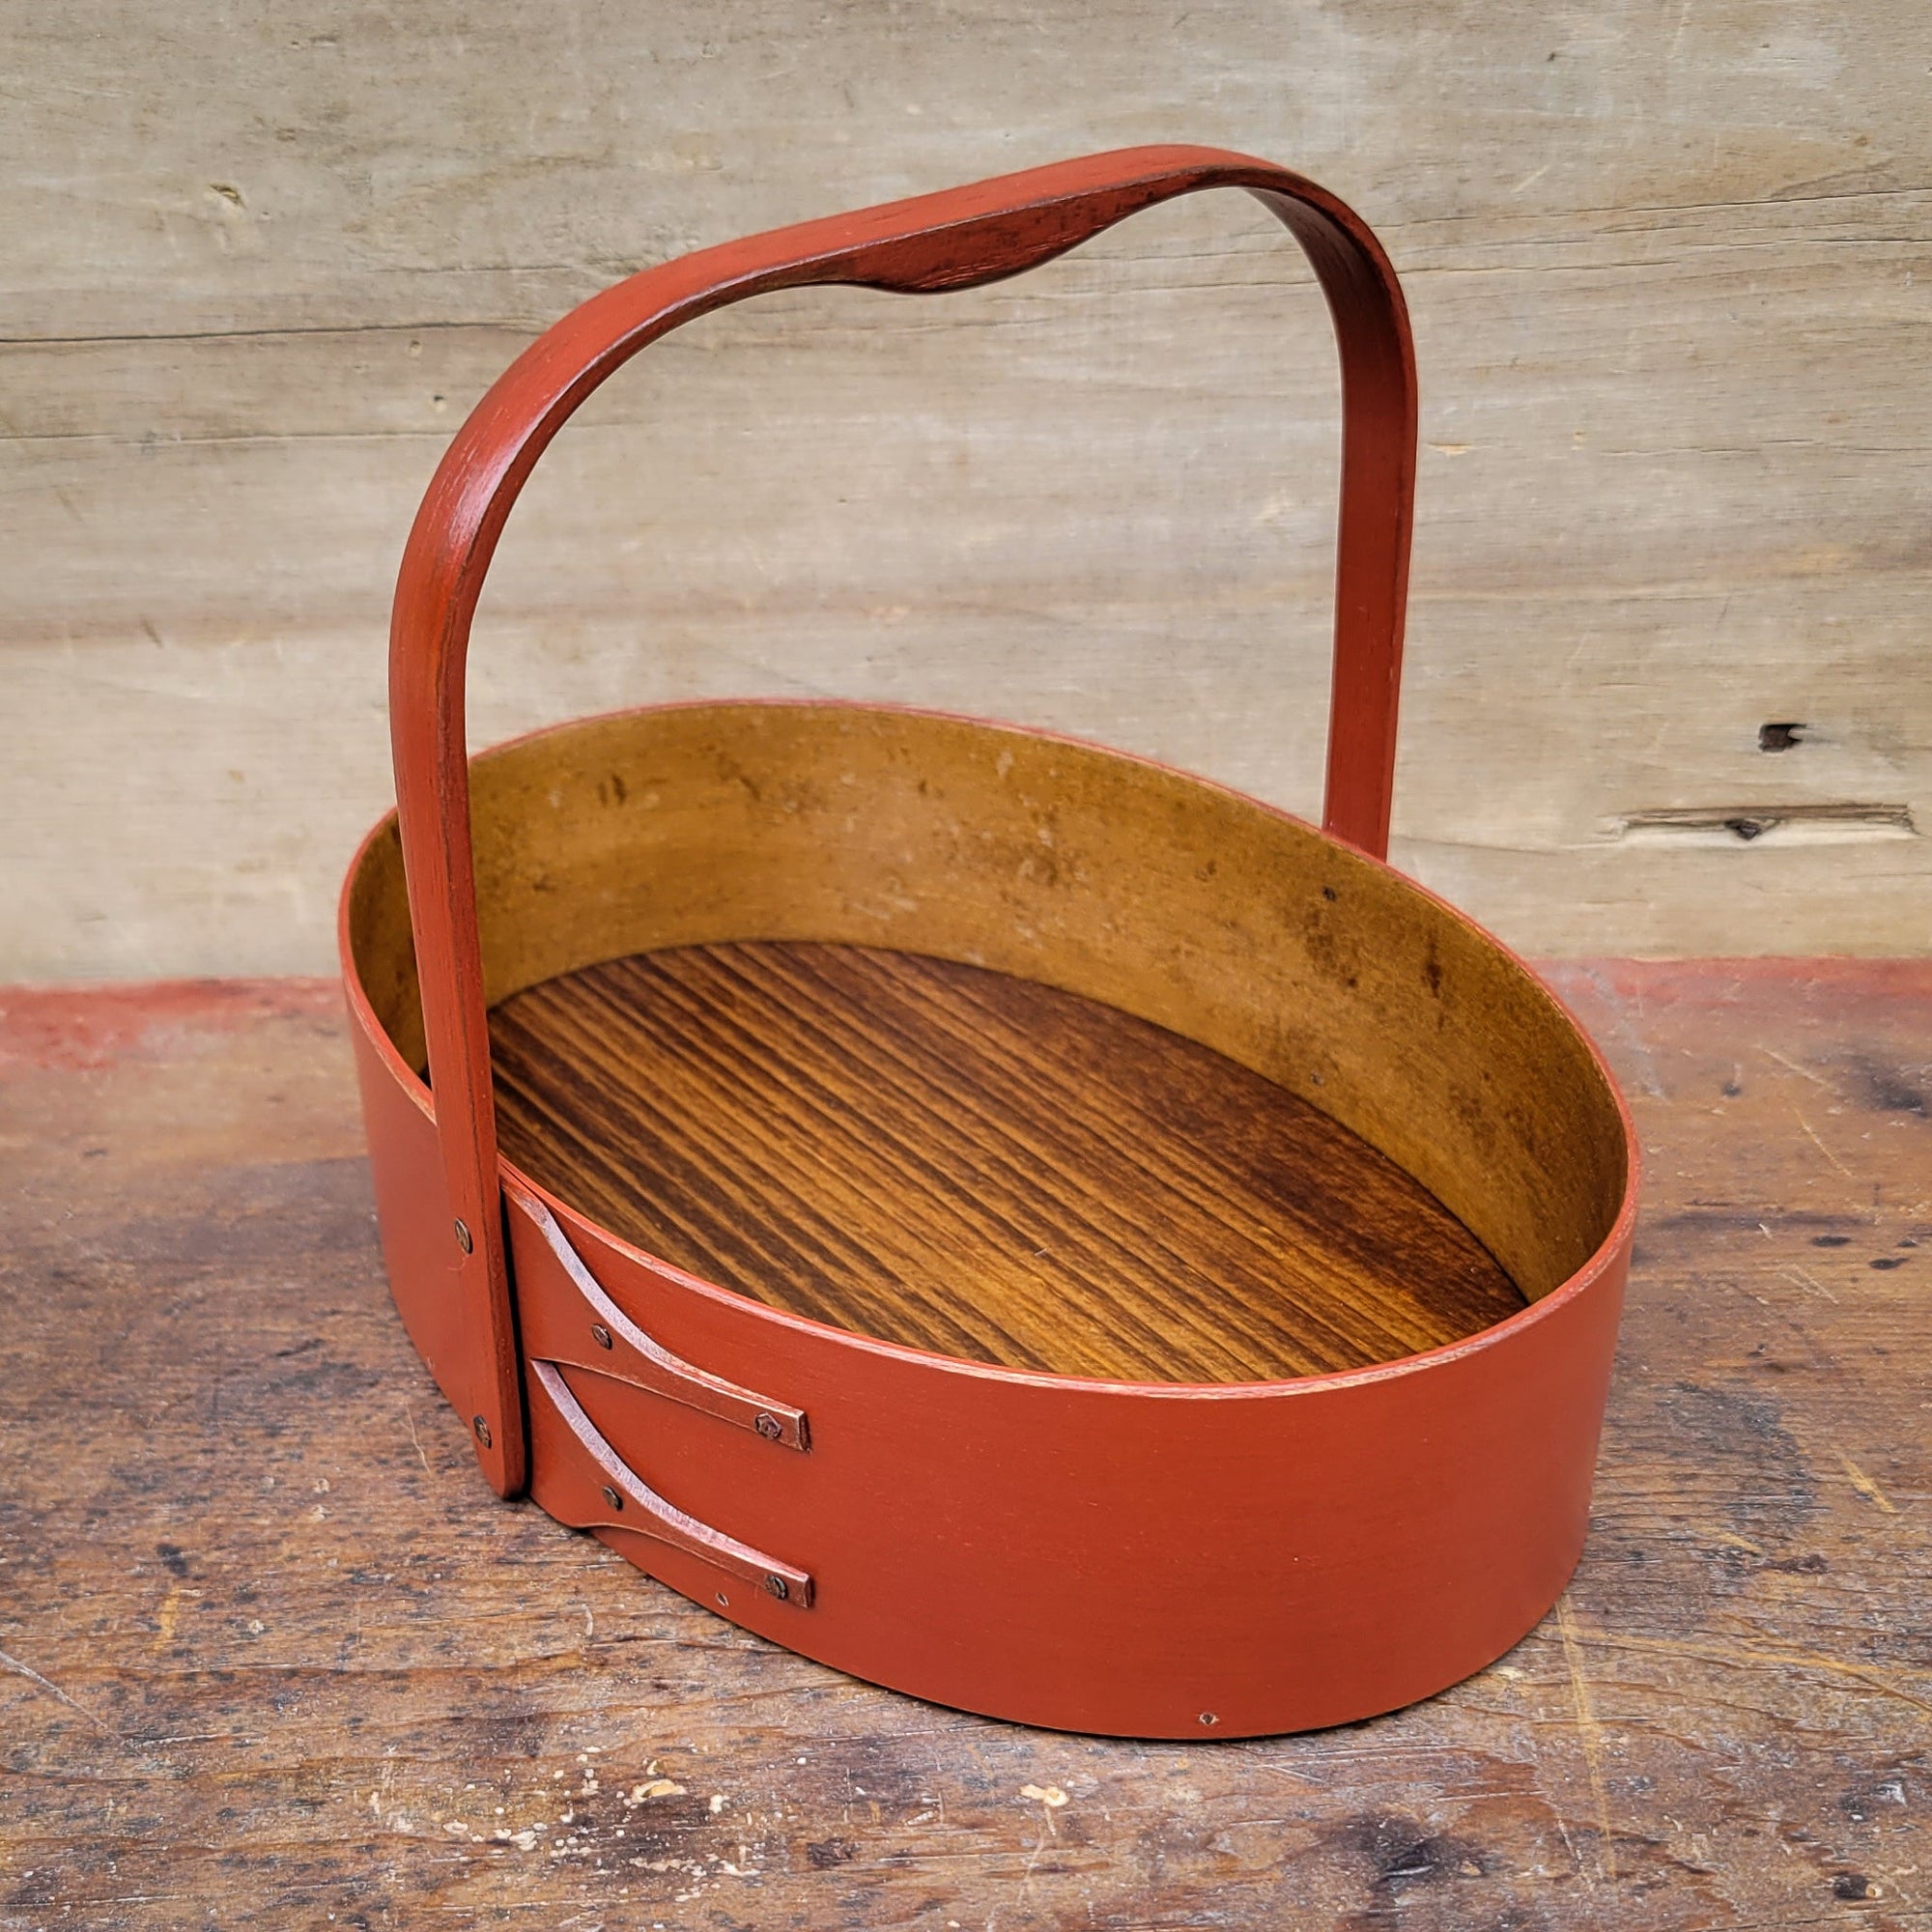 Small Shaker Style Sewing Carrier, LeHays Shaker Boxes, Handcrafted in Maine, Red Milk Paint Finish, Side View